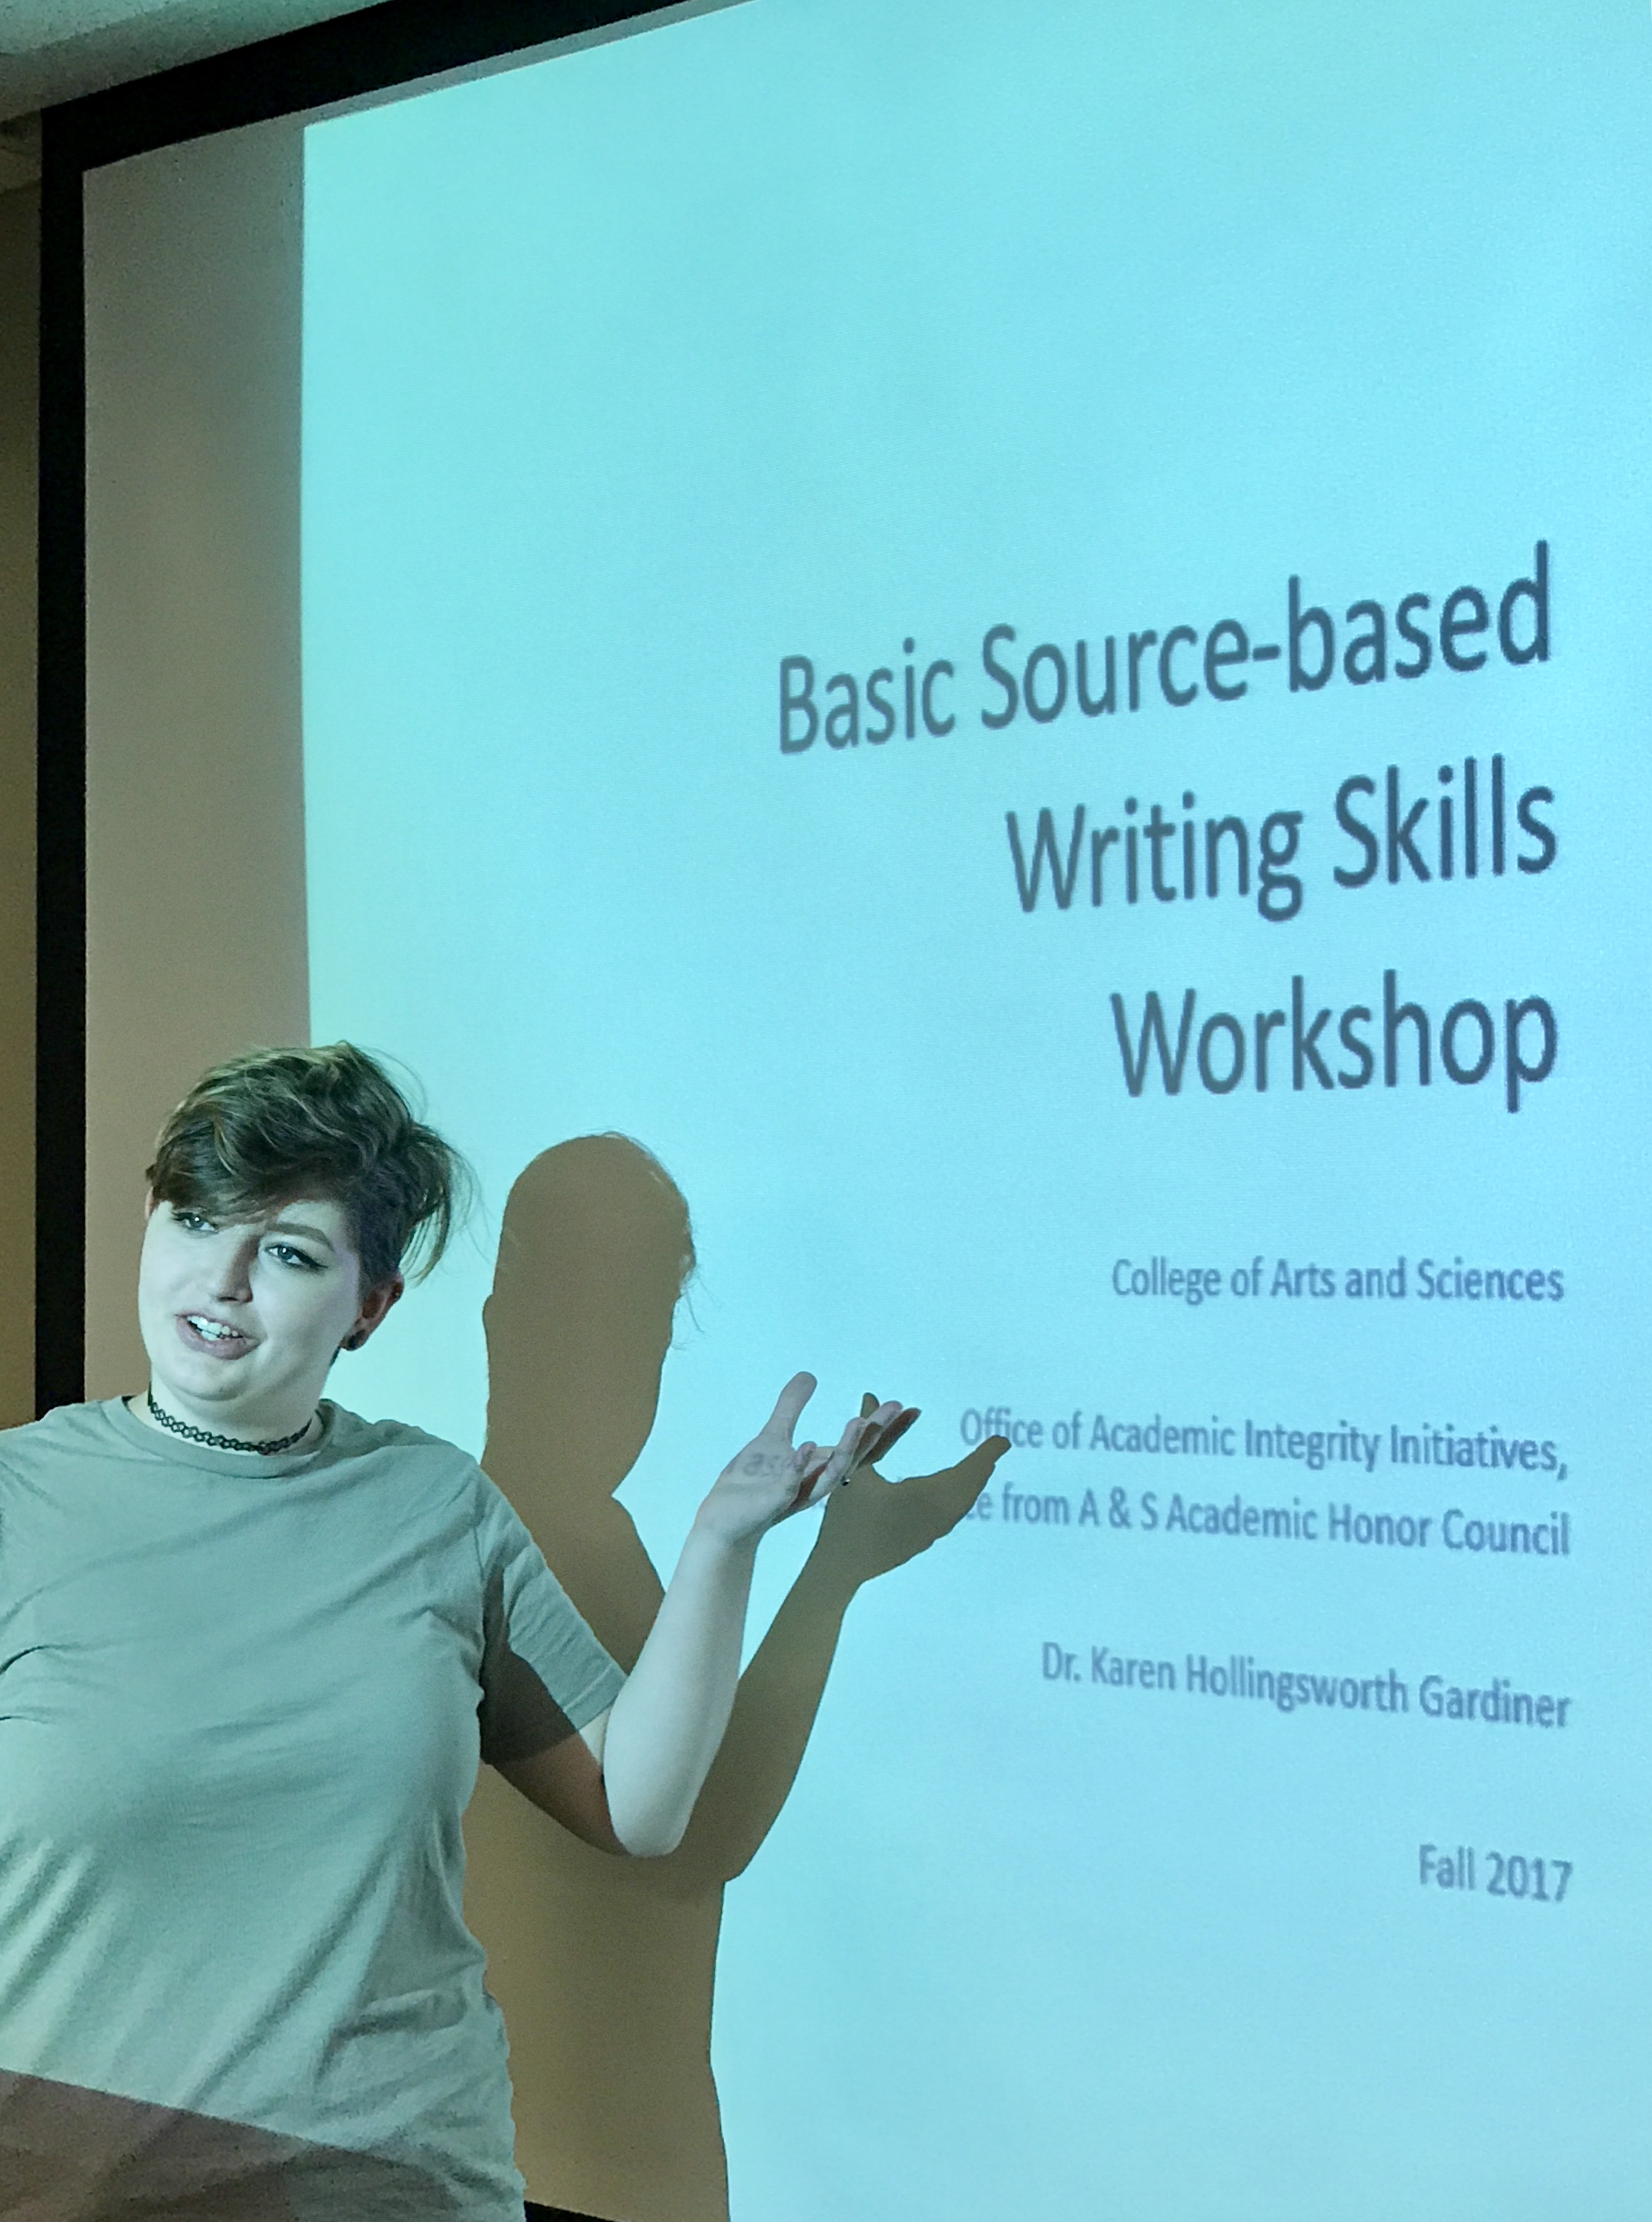 A & S AHC justice Abby DeKraai assists with September 20 Basic Source-based Writing Skills workshop